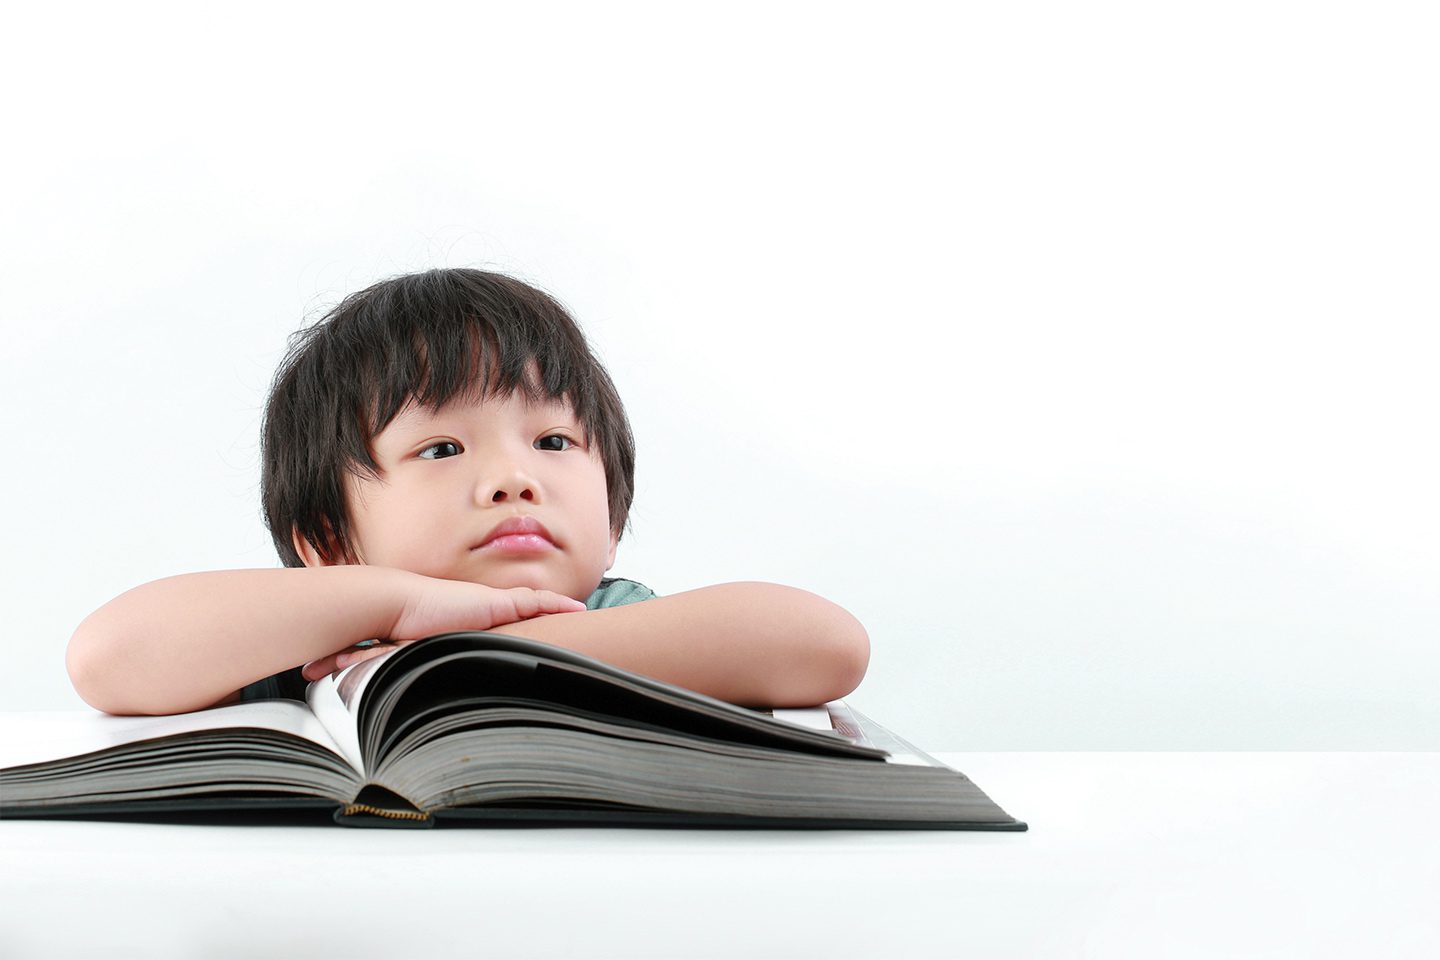 Young boy with arms folded over a large book.